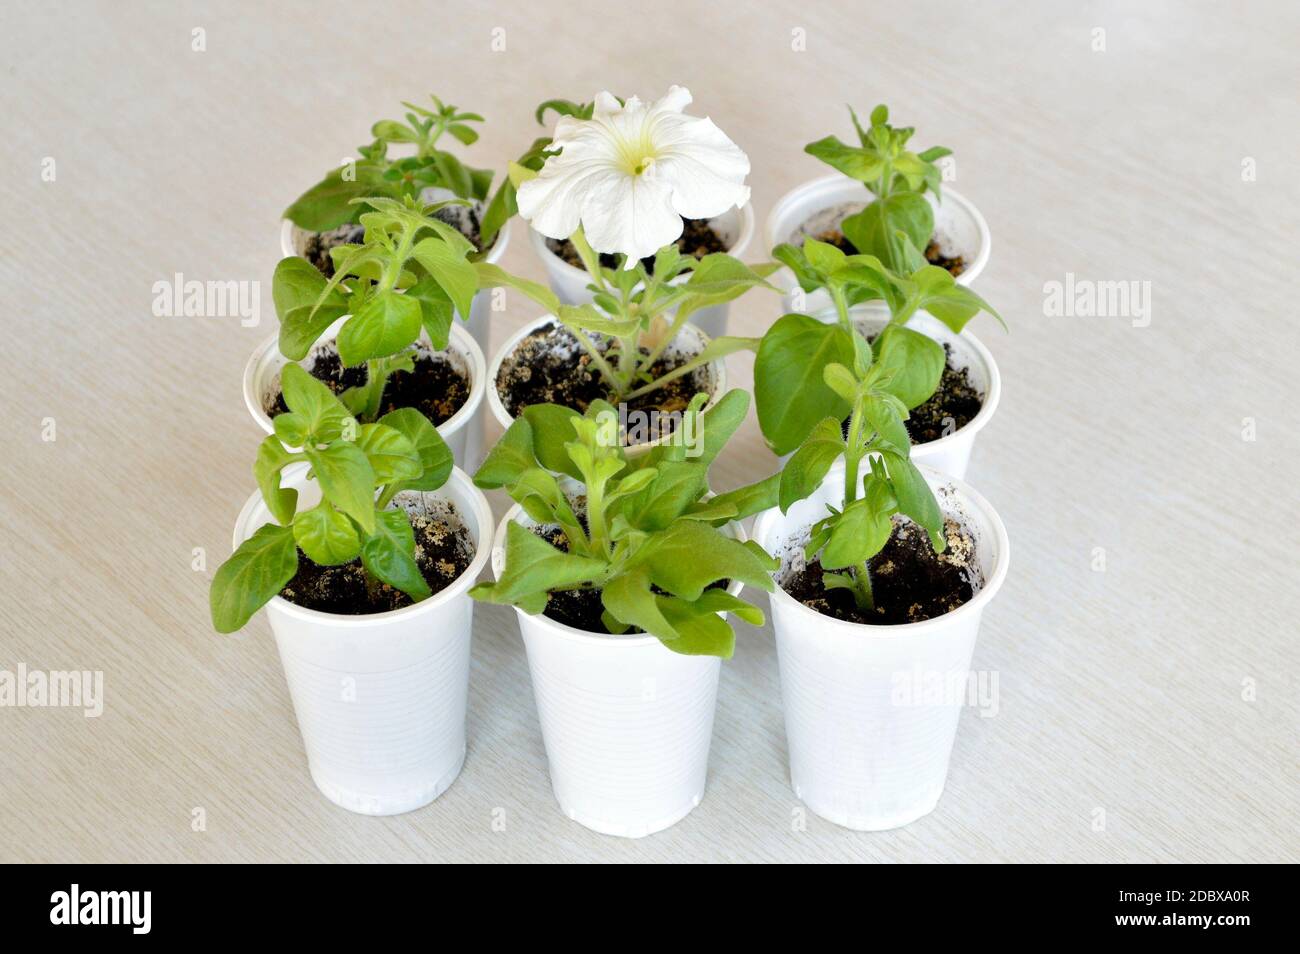 Concept of standing out from the crowd and leadership. seedlings of flowers in plastic cups and blossoming flower of white petunia. Stock Photo